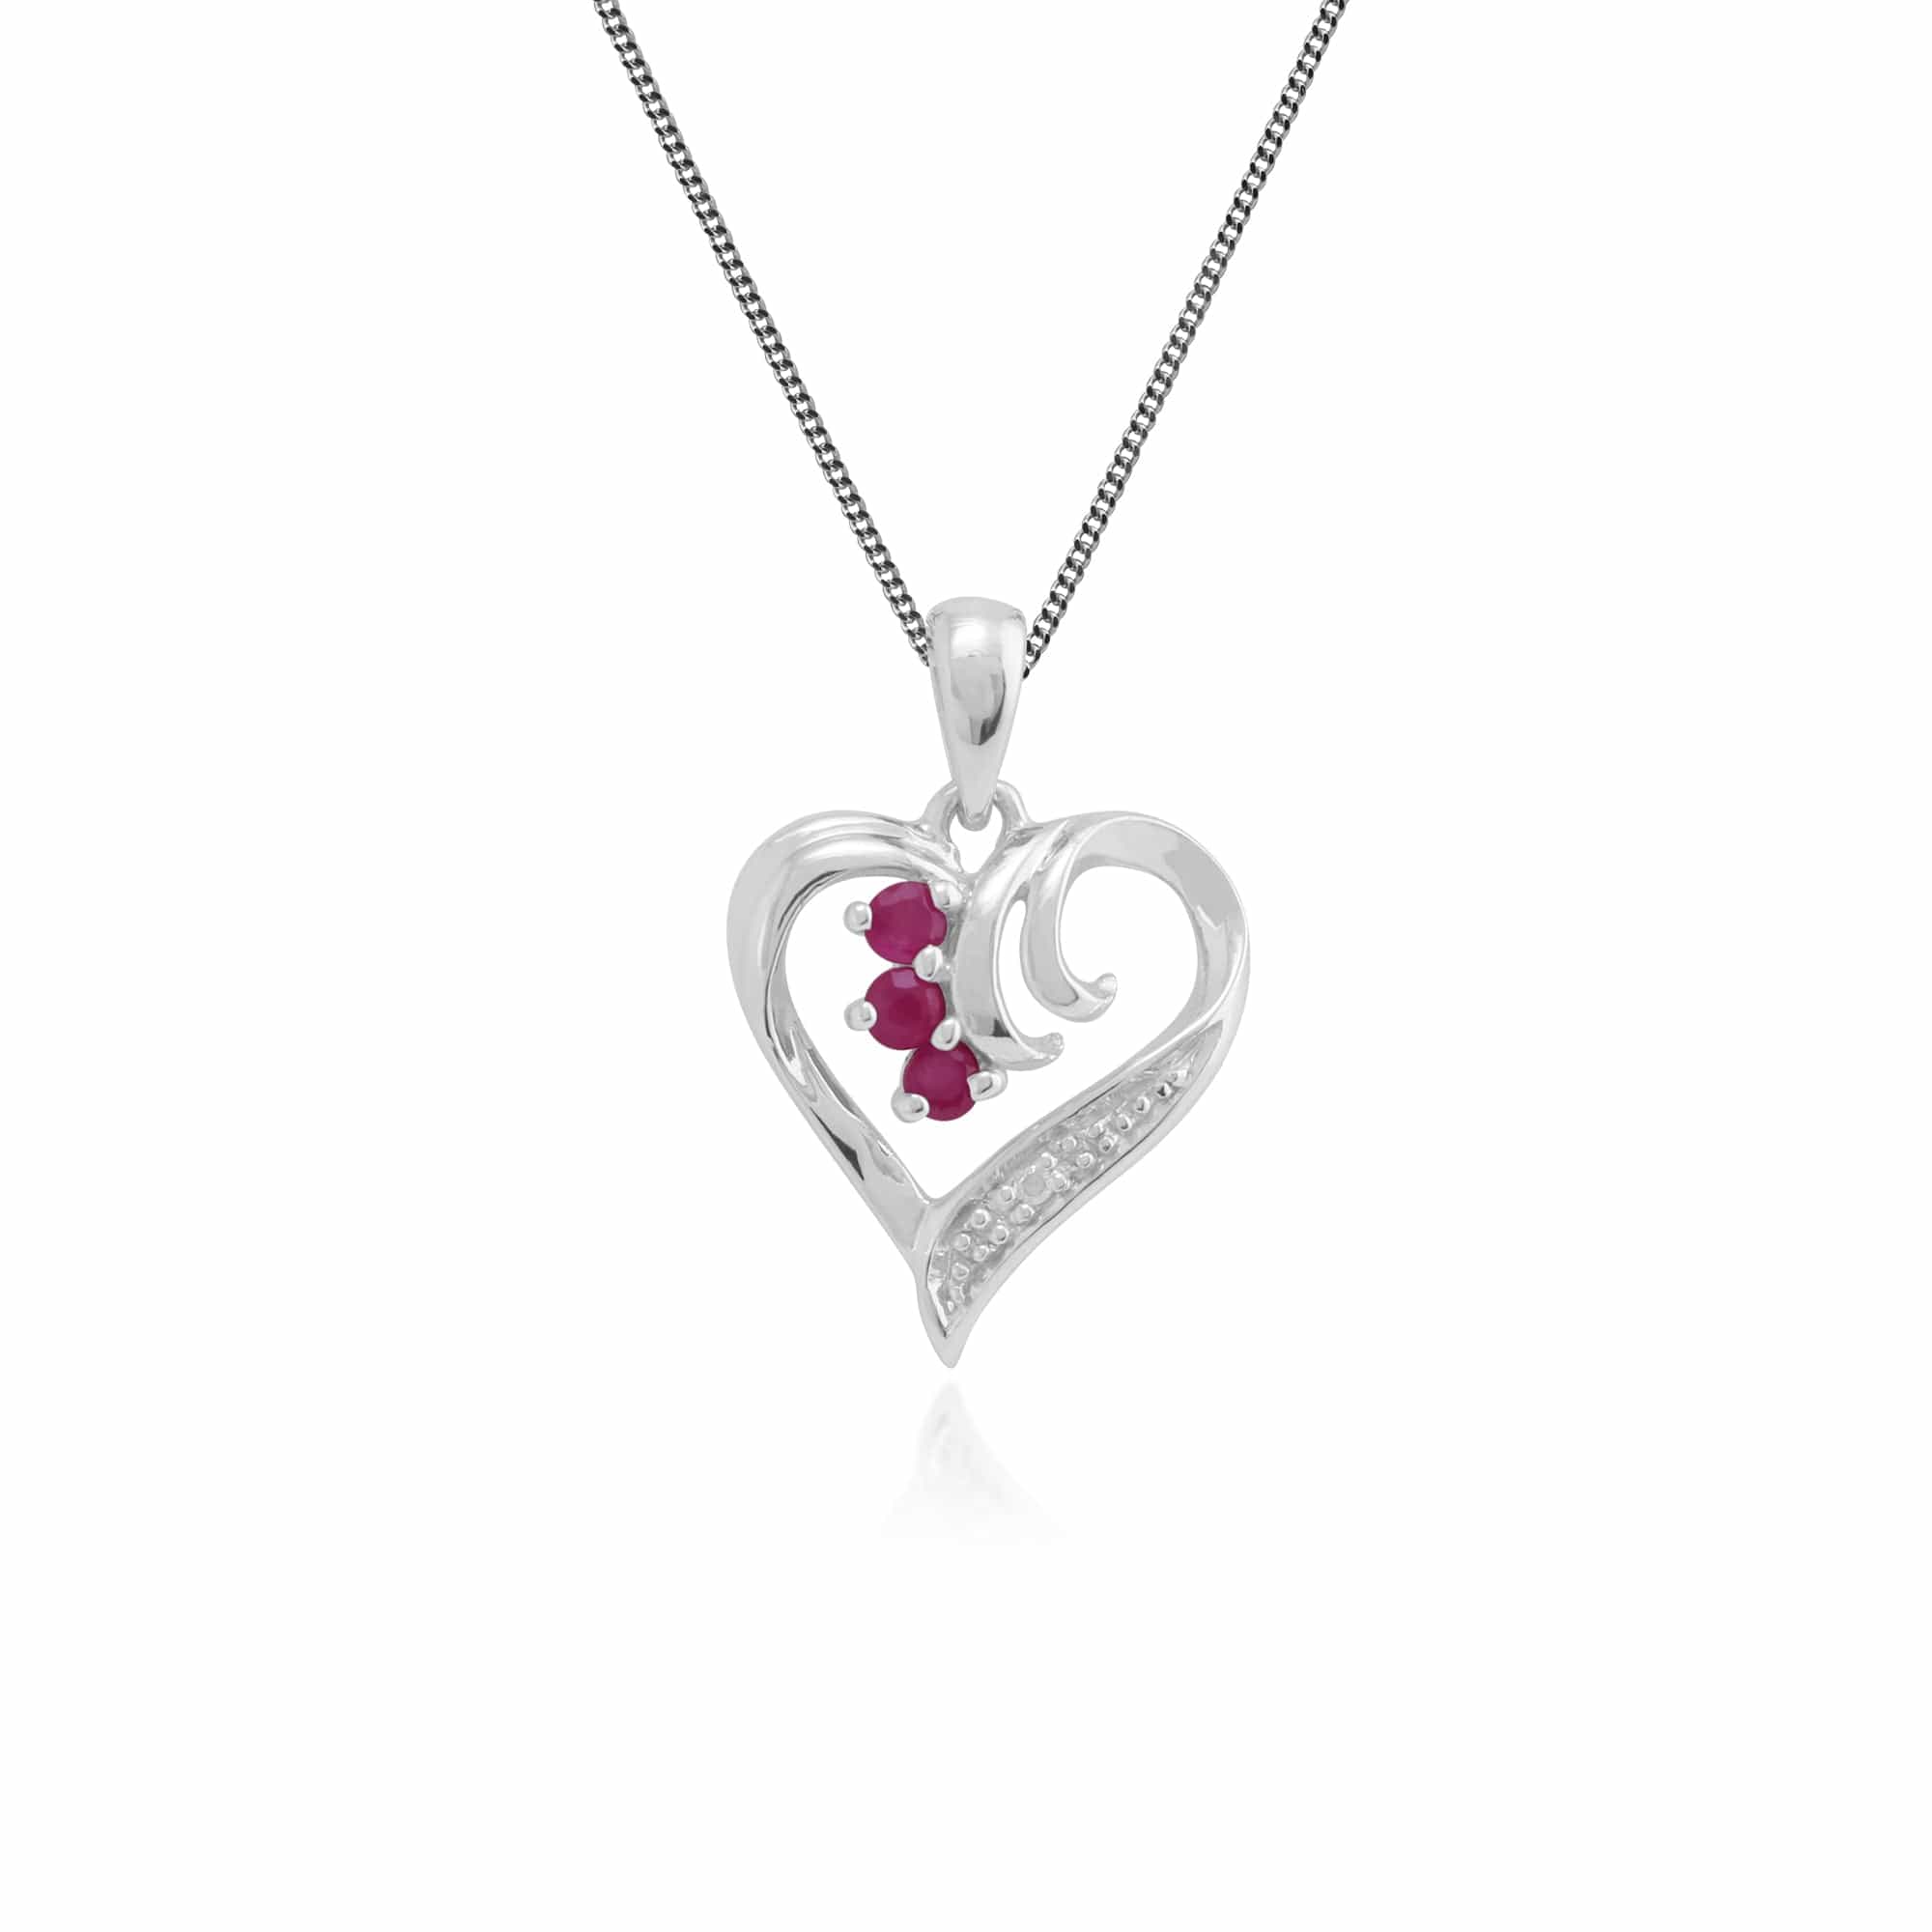 Photos - Pendant / Choker Necklace Classic Round Ruby & Diamond Swirled Heart Pendant in 9ct White Gold